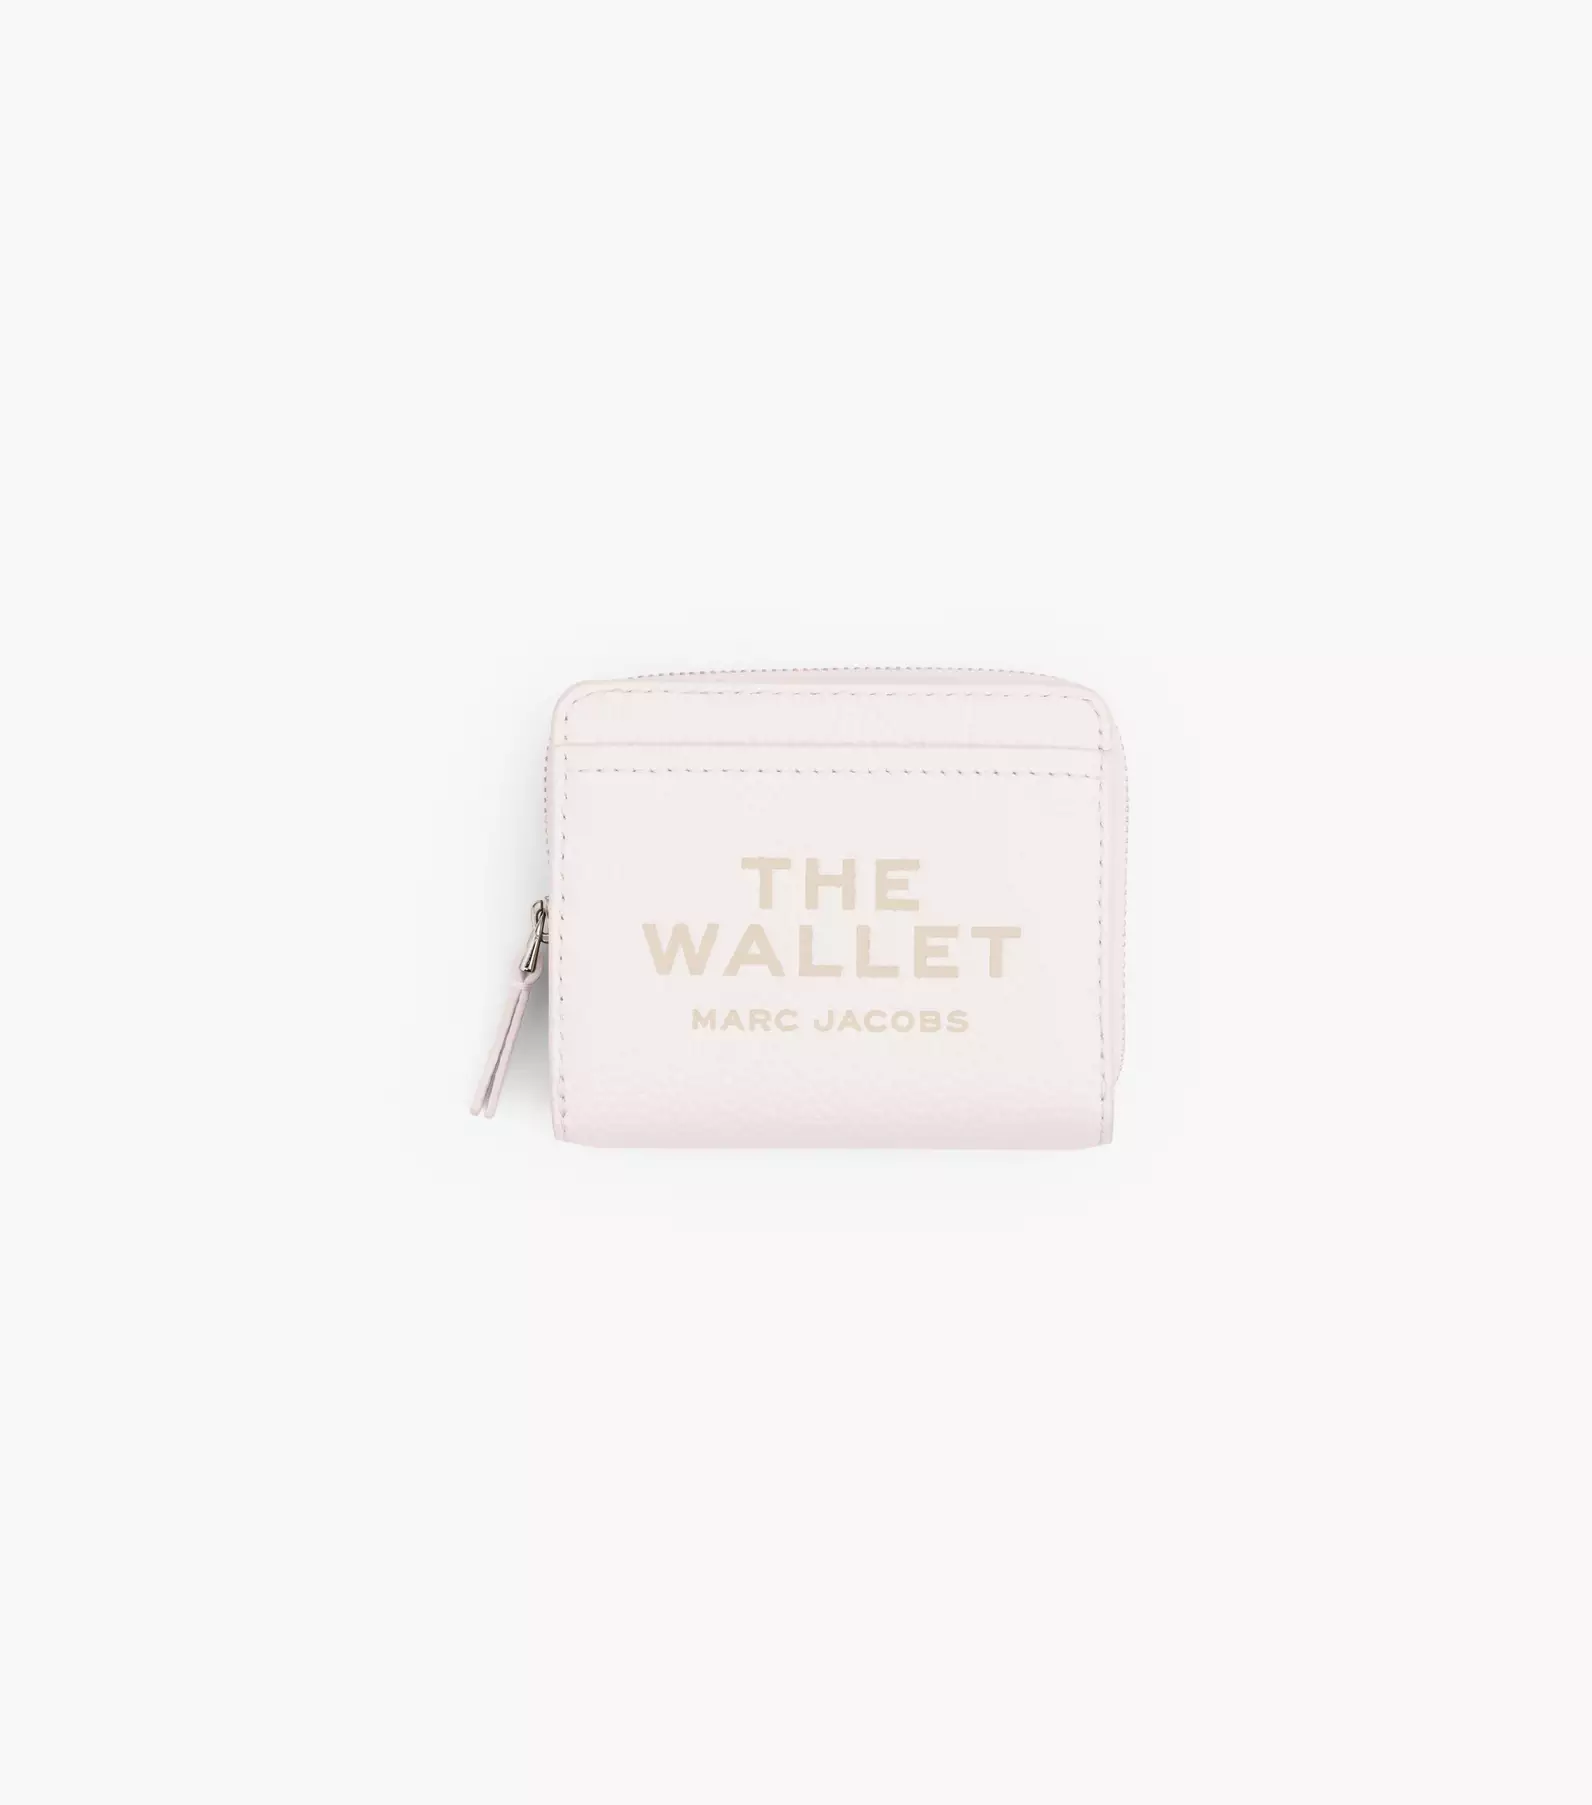 The Leather Mini Compact Wallet, Marc Jacobs